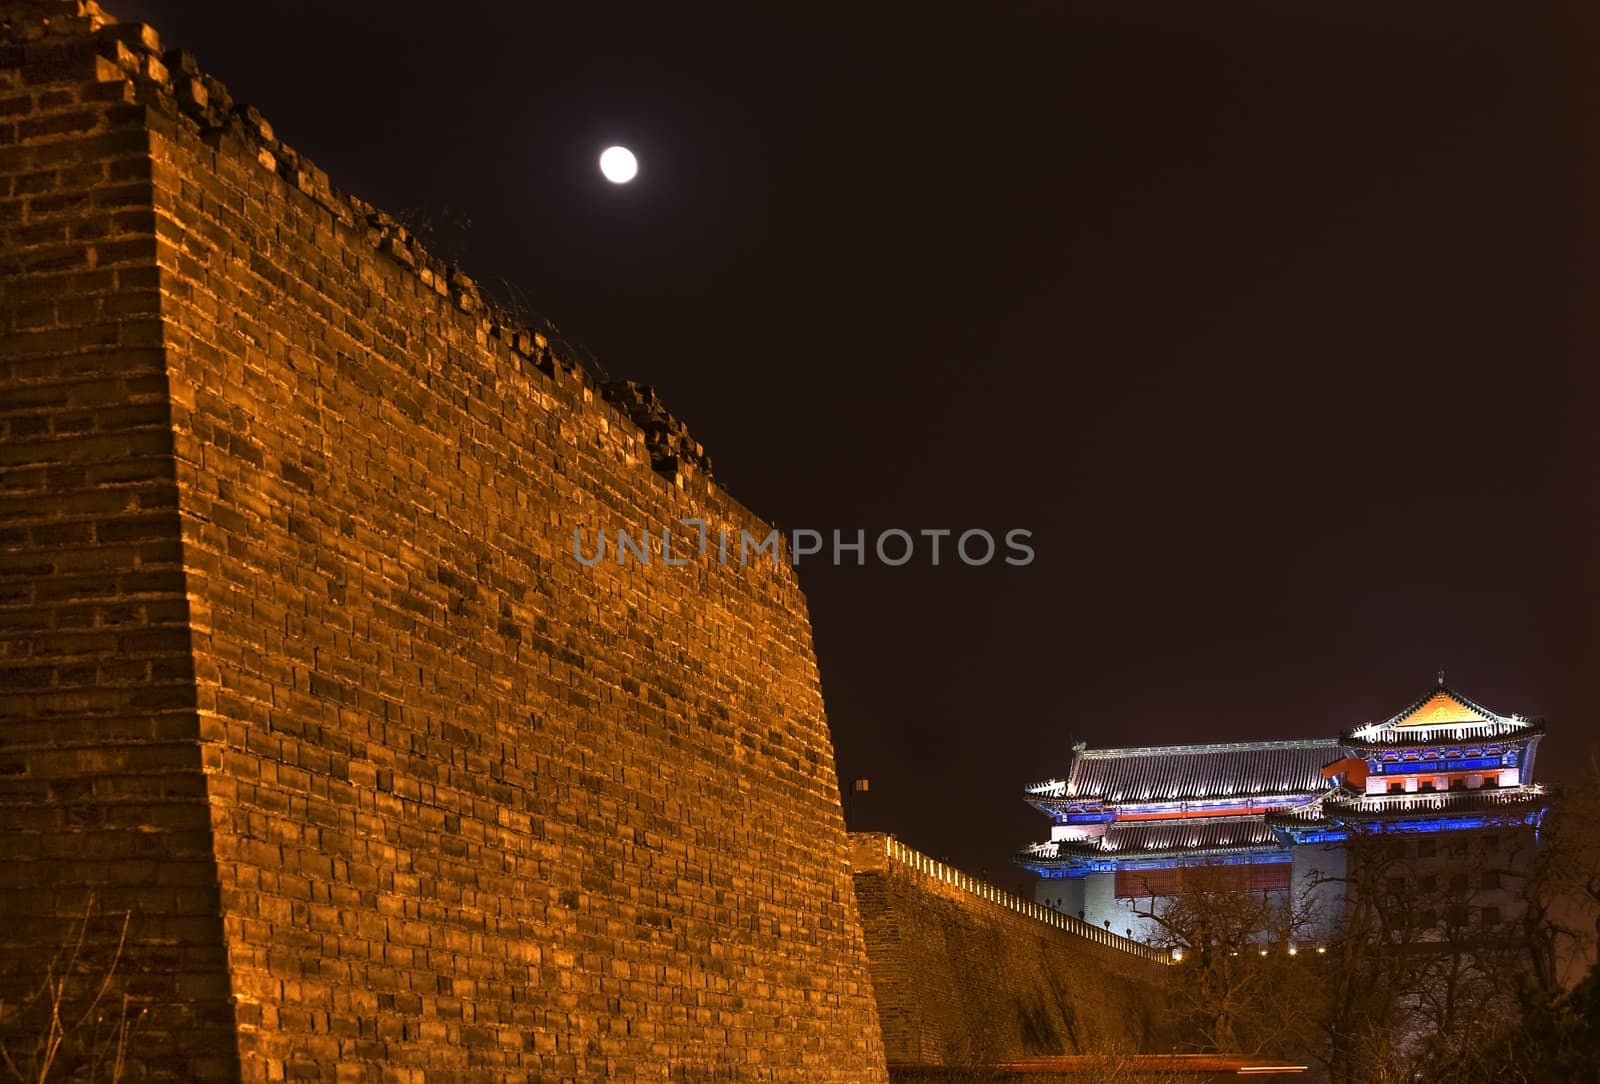 City Wall Park Night Moon Southeast Corner Watchtower Dongguan Men Beijing China

Resubmit--In response to comments from reviewer have further processed image to reduce noise, sharpen focus and adjust lighting.